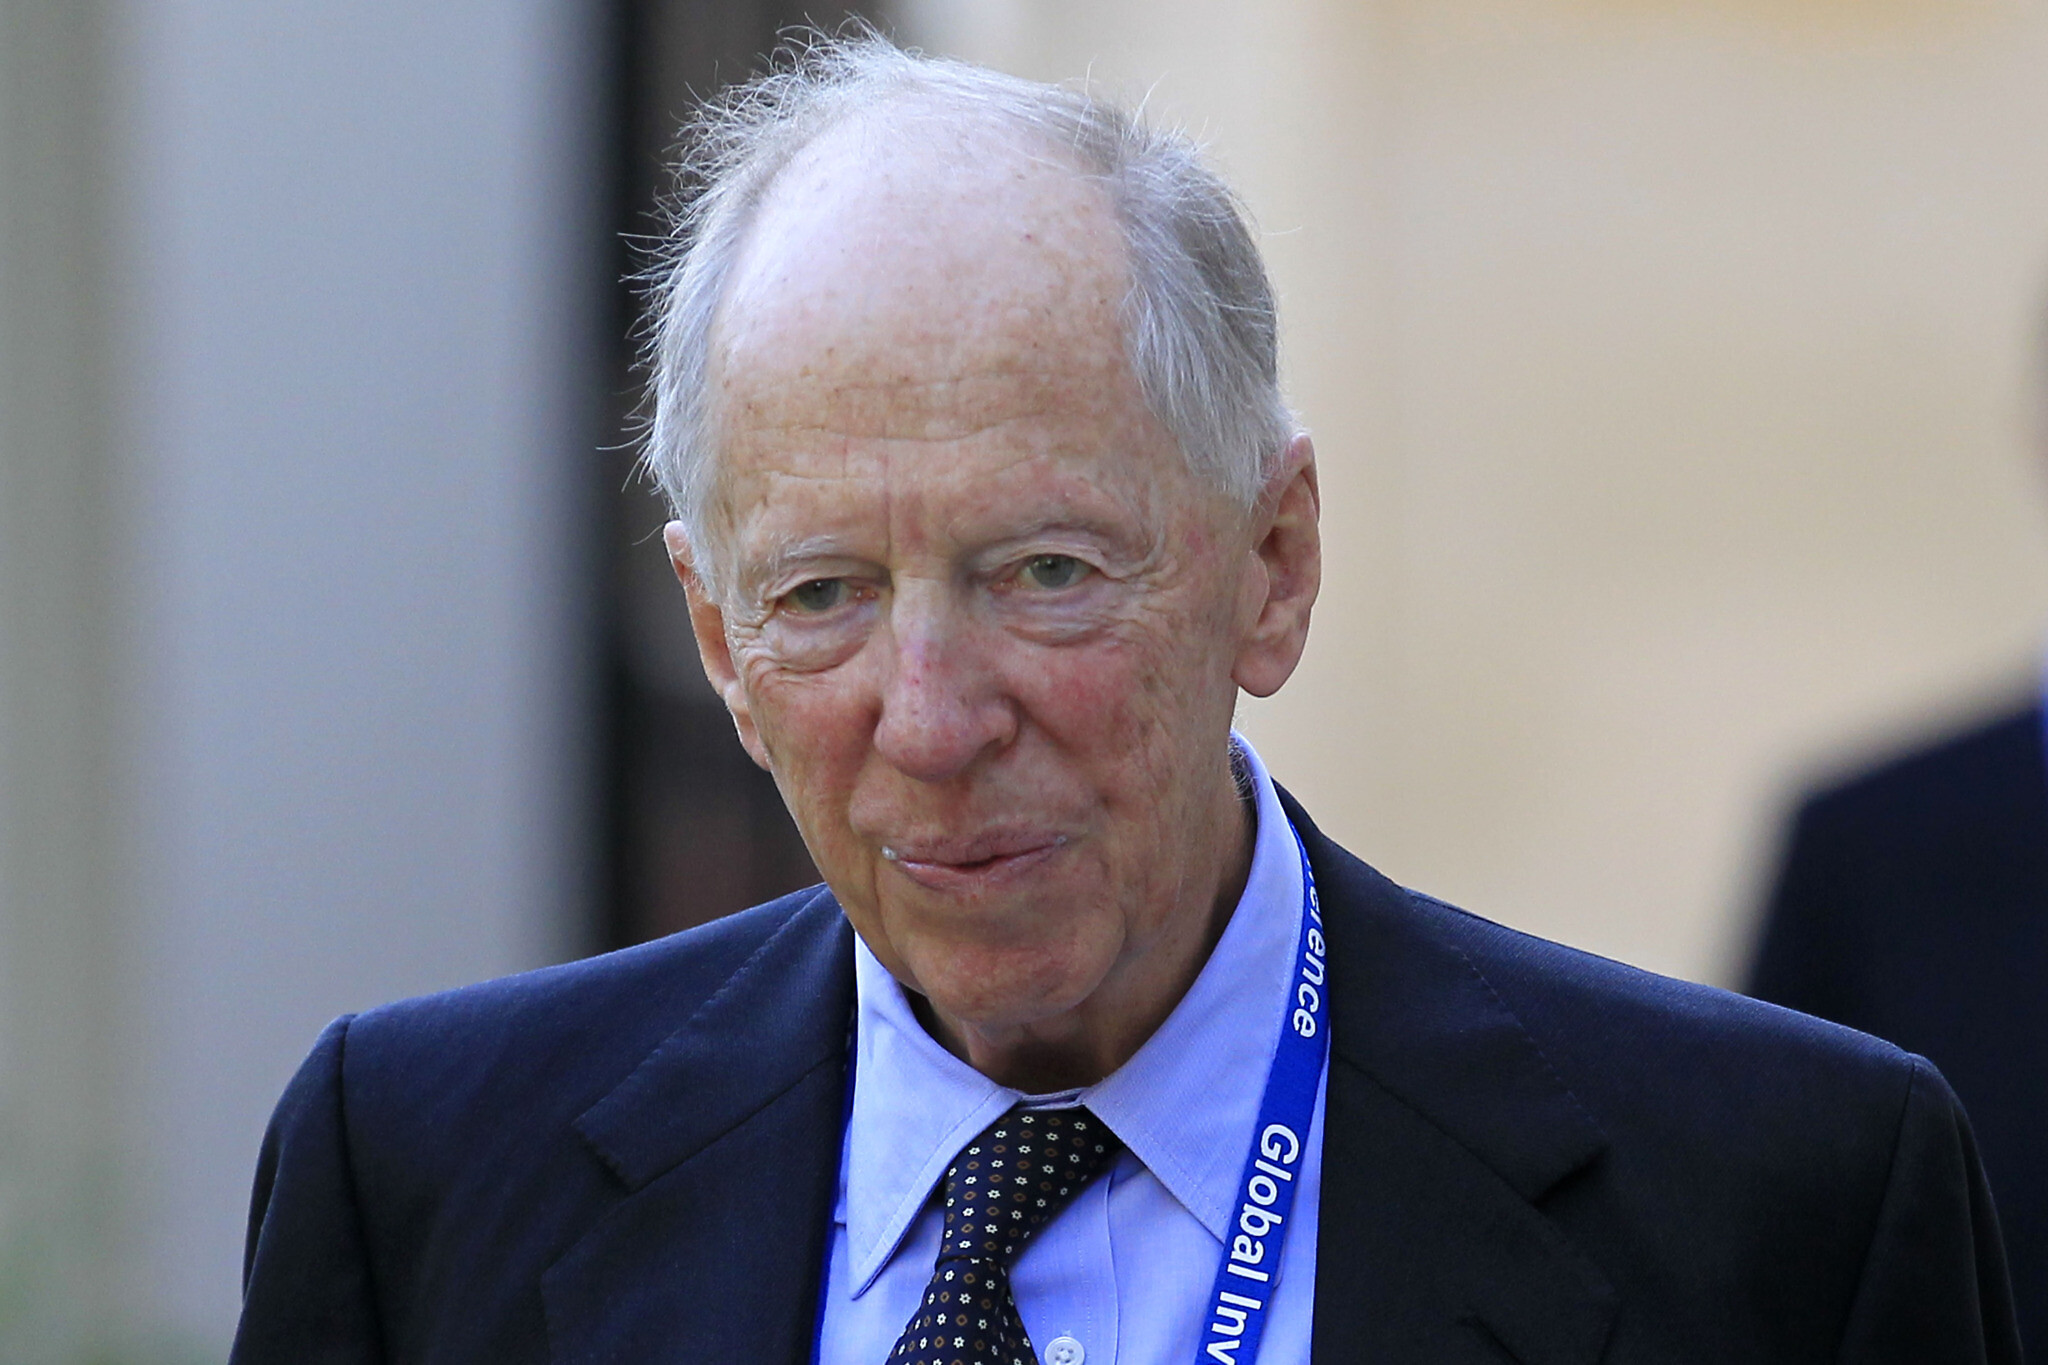 Obituary and Funeral of Jacob Rothschild: Details of him Death - Jacob Rothschild cause of death? What Happened to him? 3